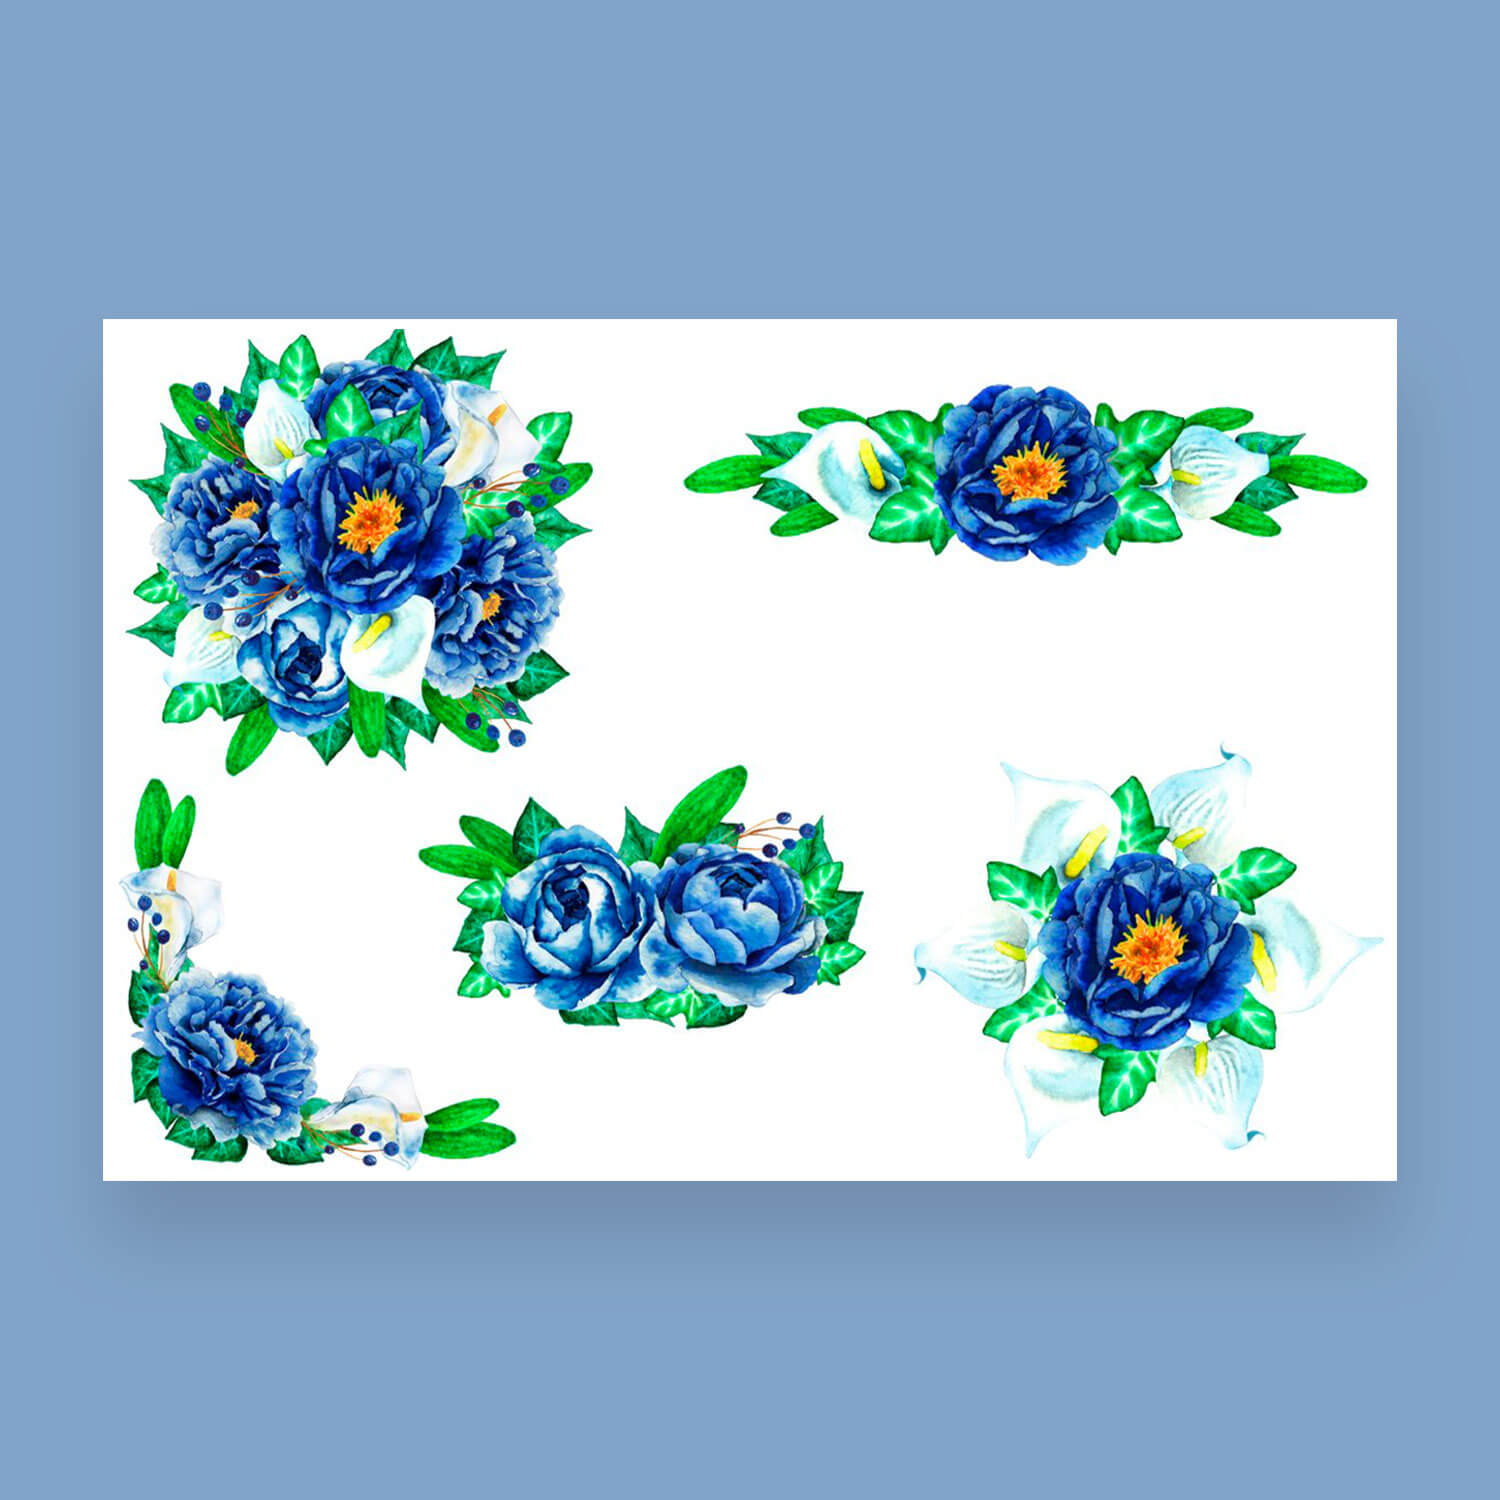 Dark blue and white bouquet of flowers on a white background.